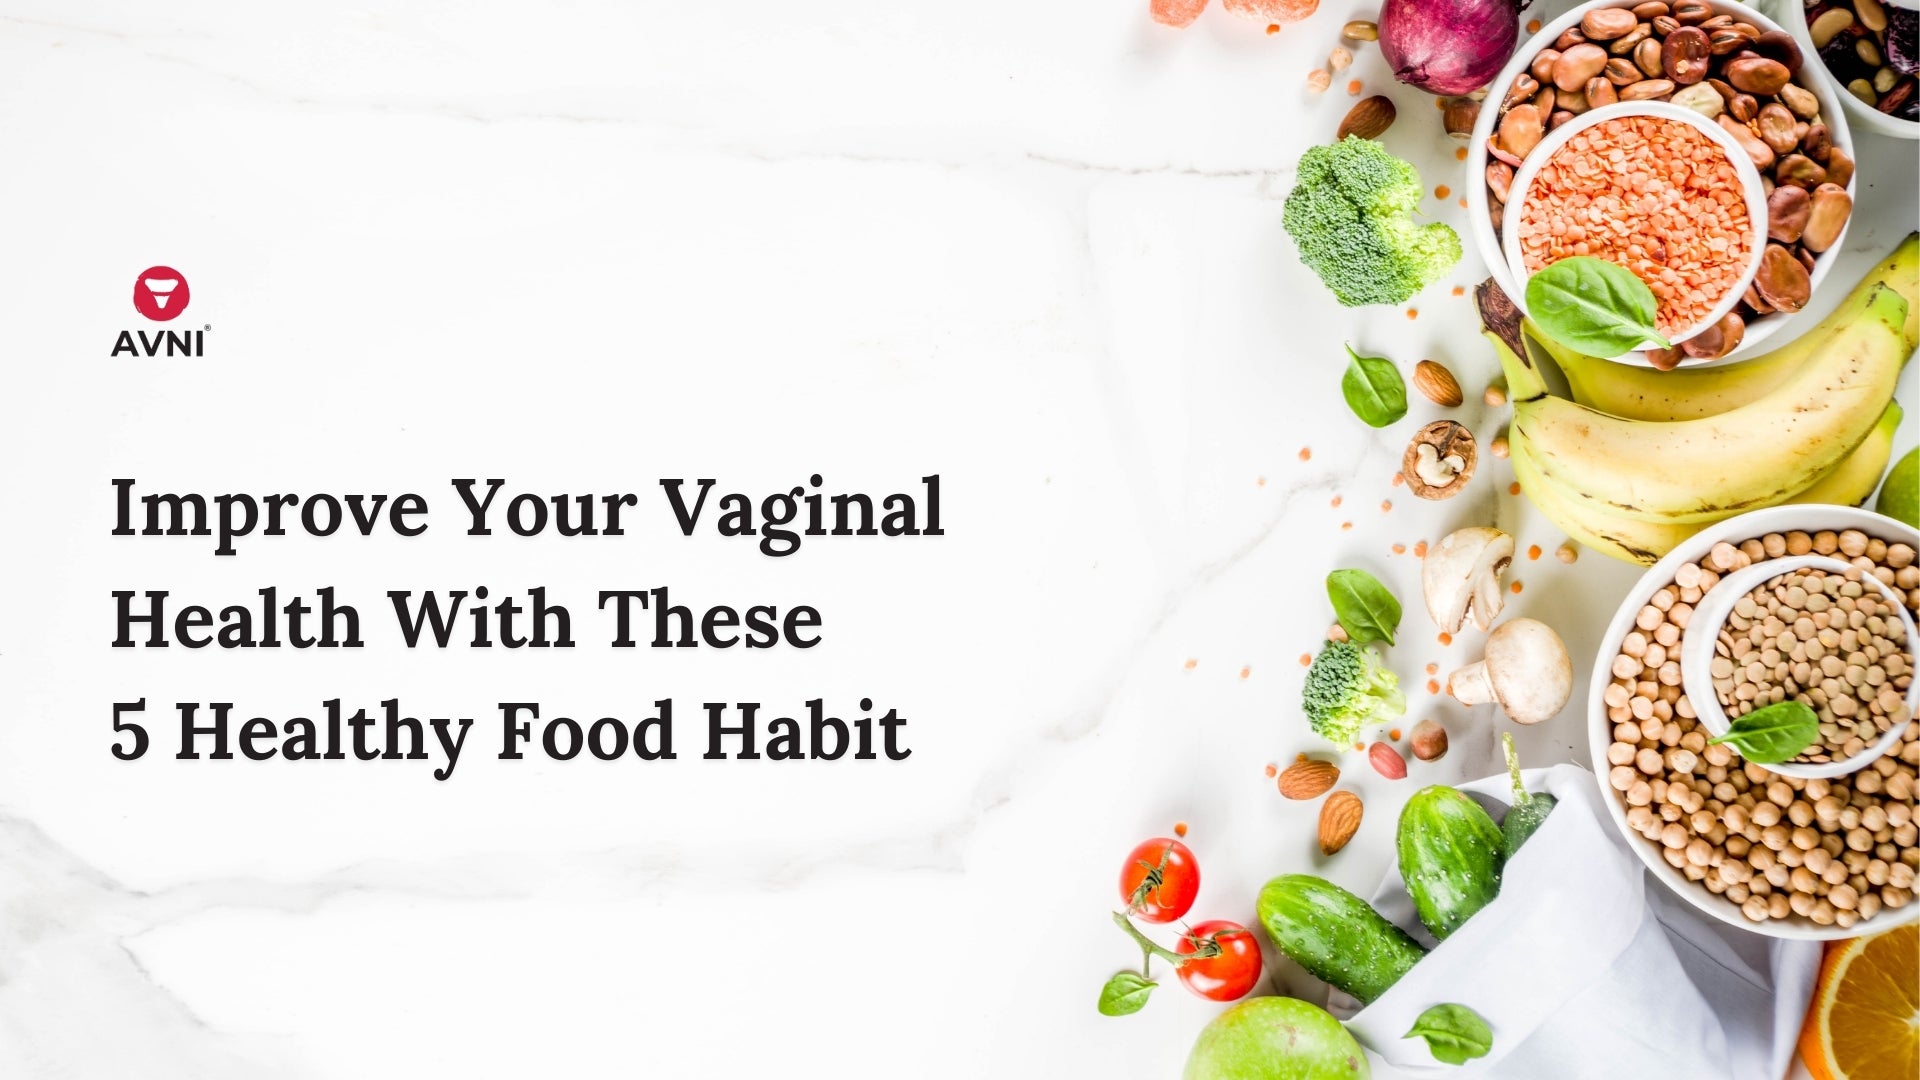 Improve Your Vaginal Health With These 5 Healthy Food Habits